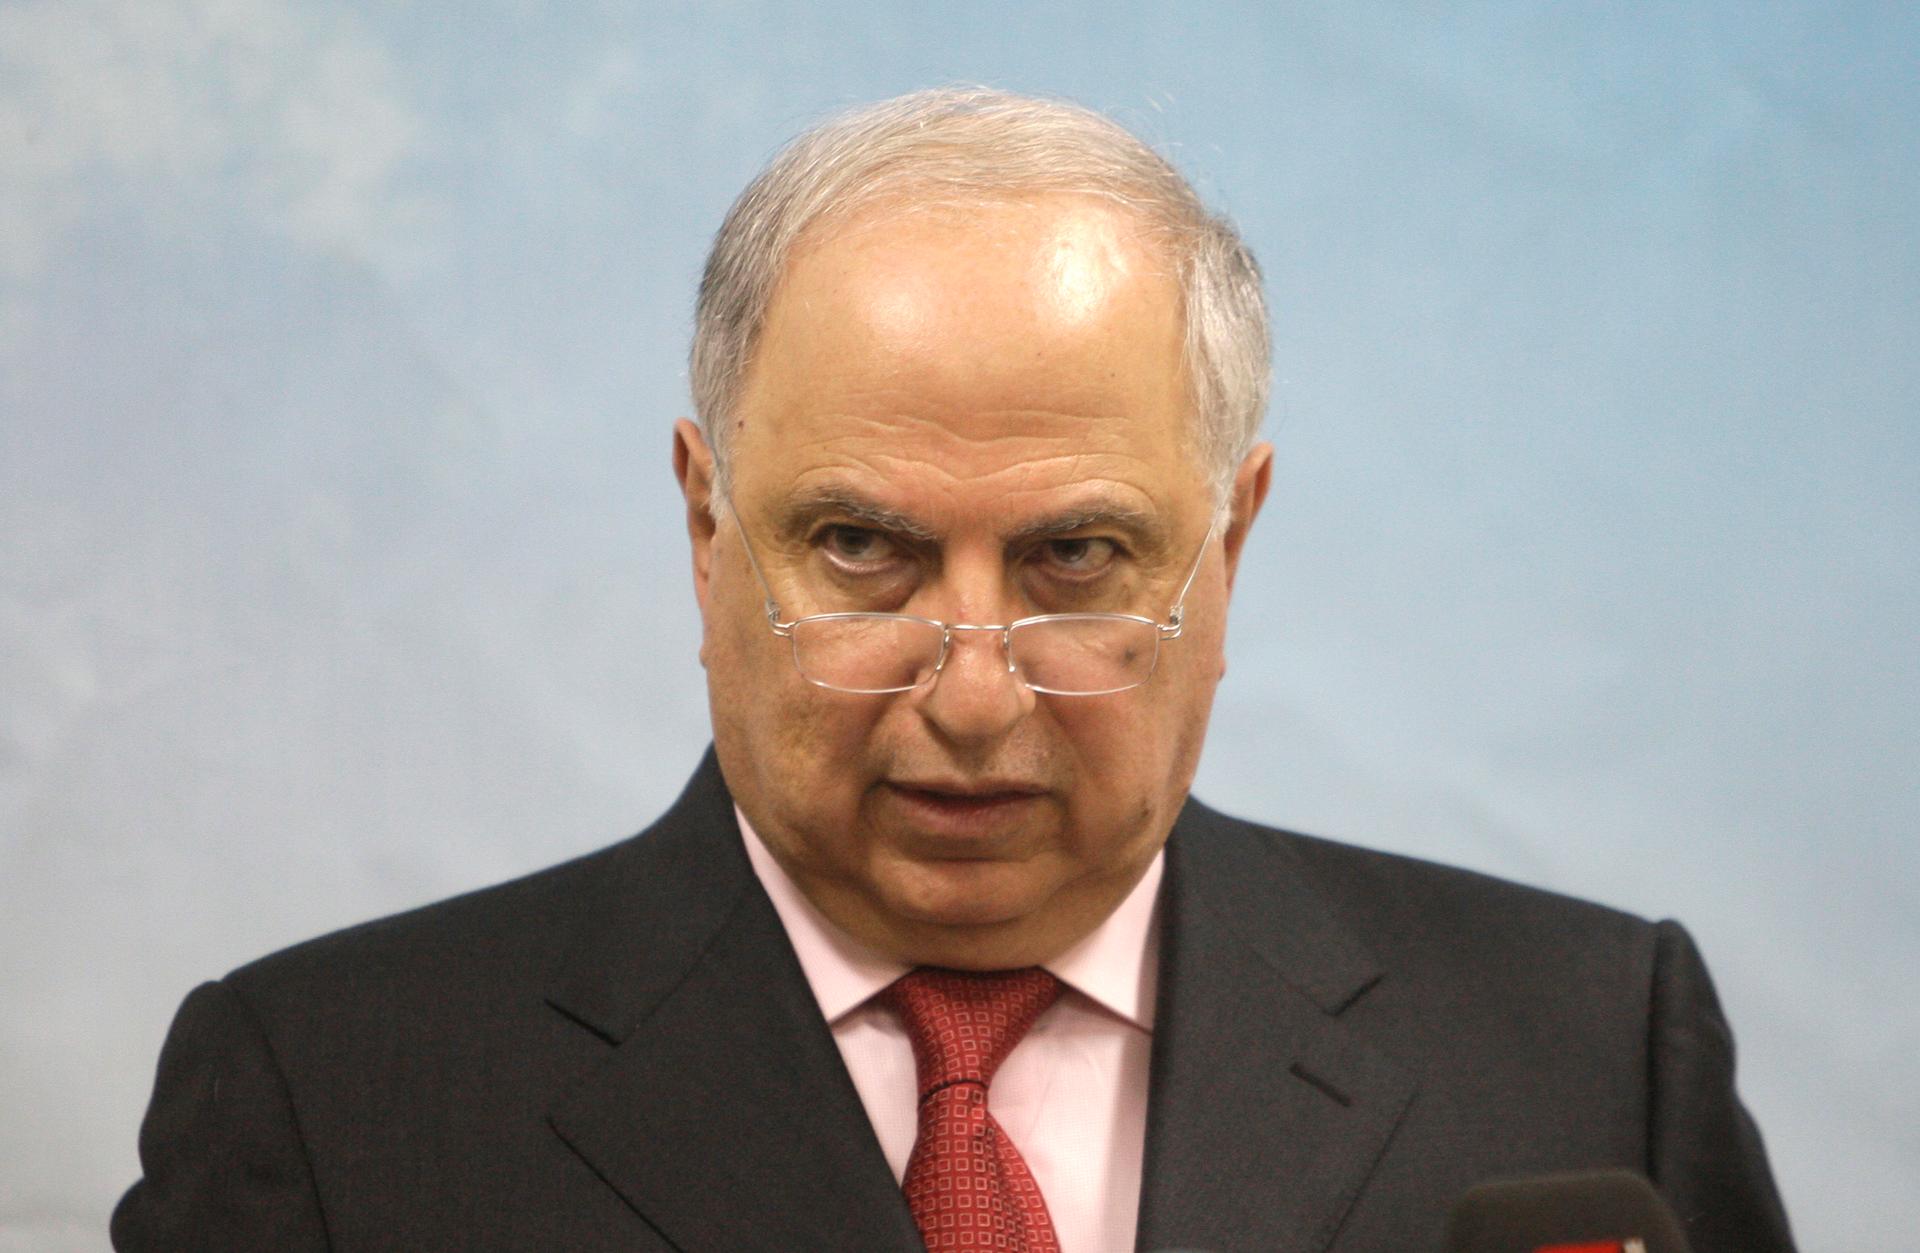 Iraqi politician Ahmed Chalabi, at a news conference in Baghdad, in 2010.